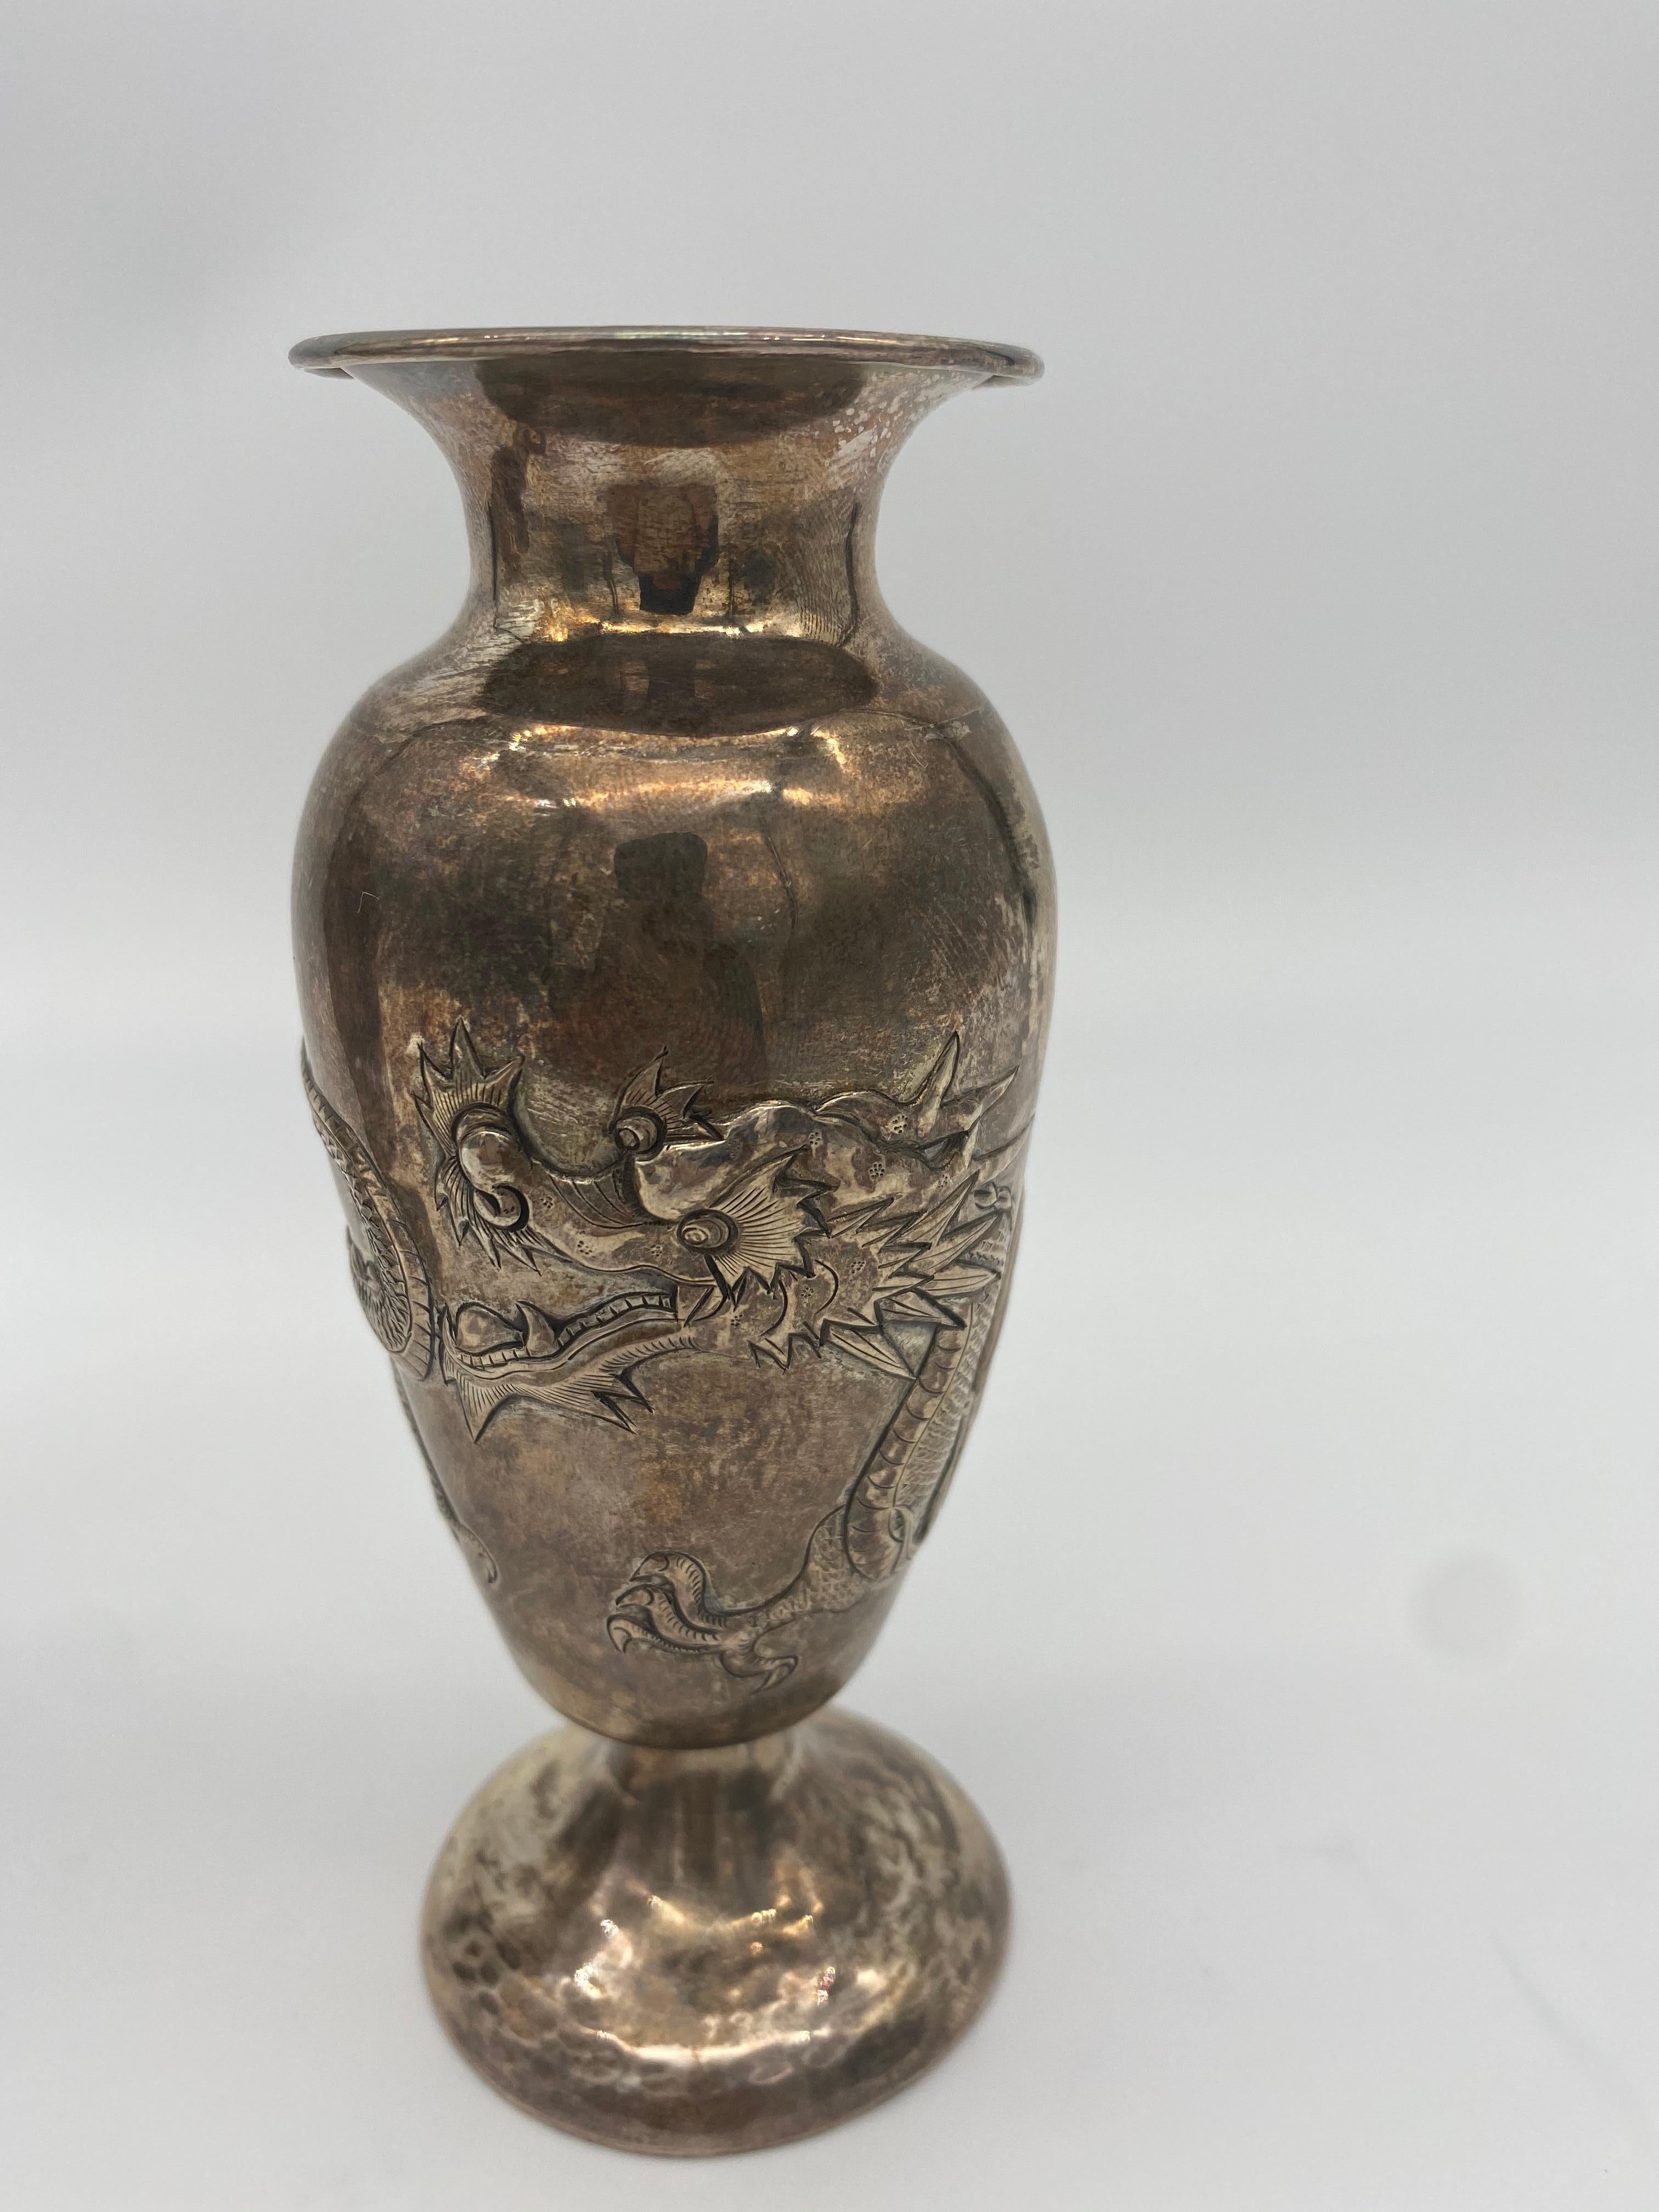 Early 19th century pair of Chinese silver vases decorated with four-clawed dragons. Derived from the period of the Qing dynasty with Chinese marks on the bottom. Weight: 200 grams.